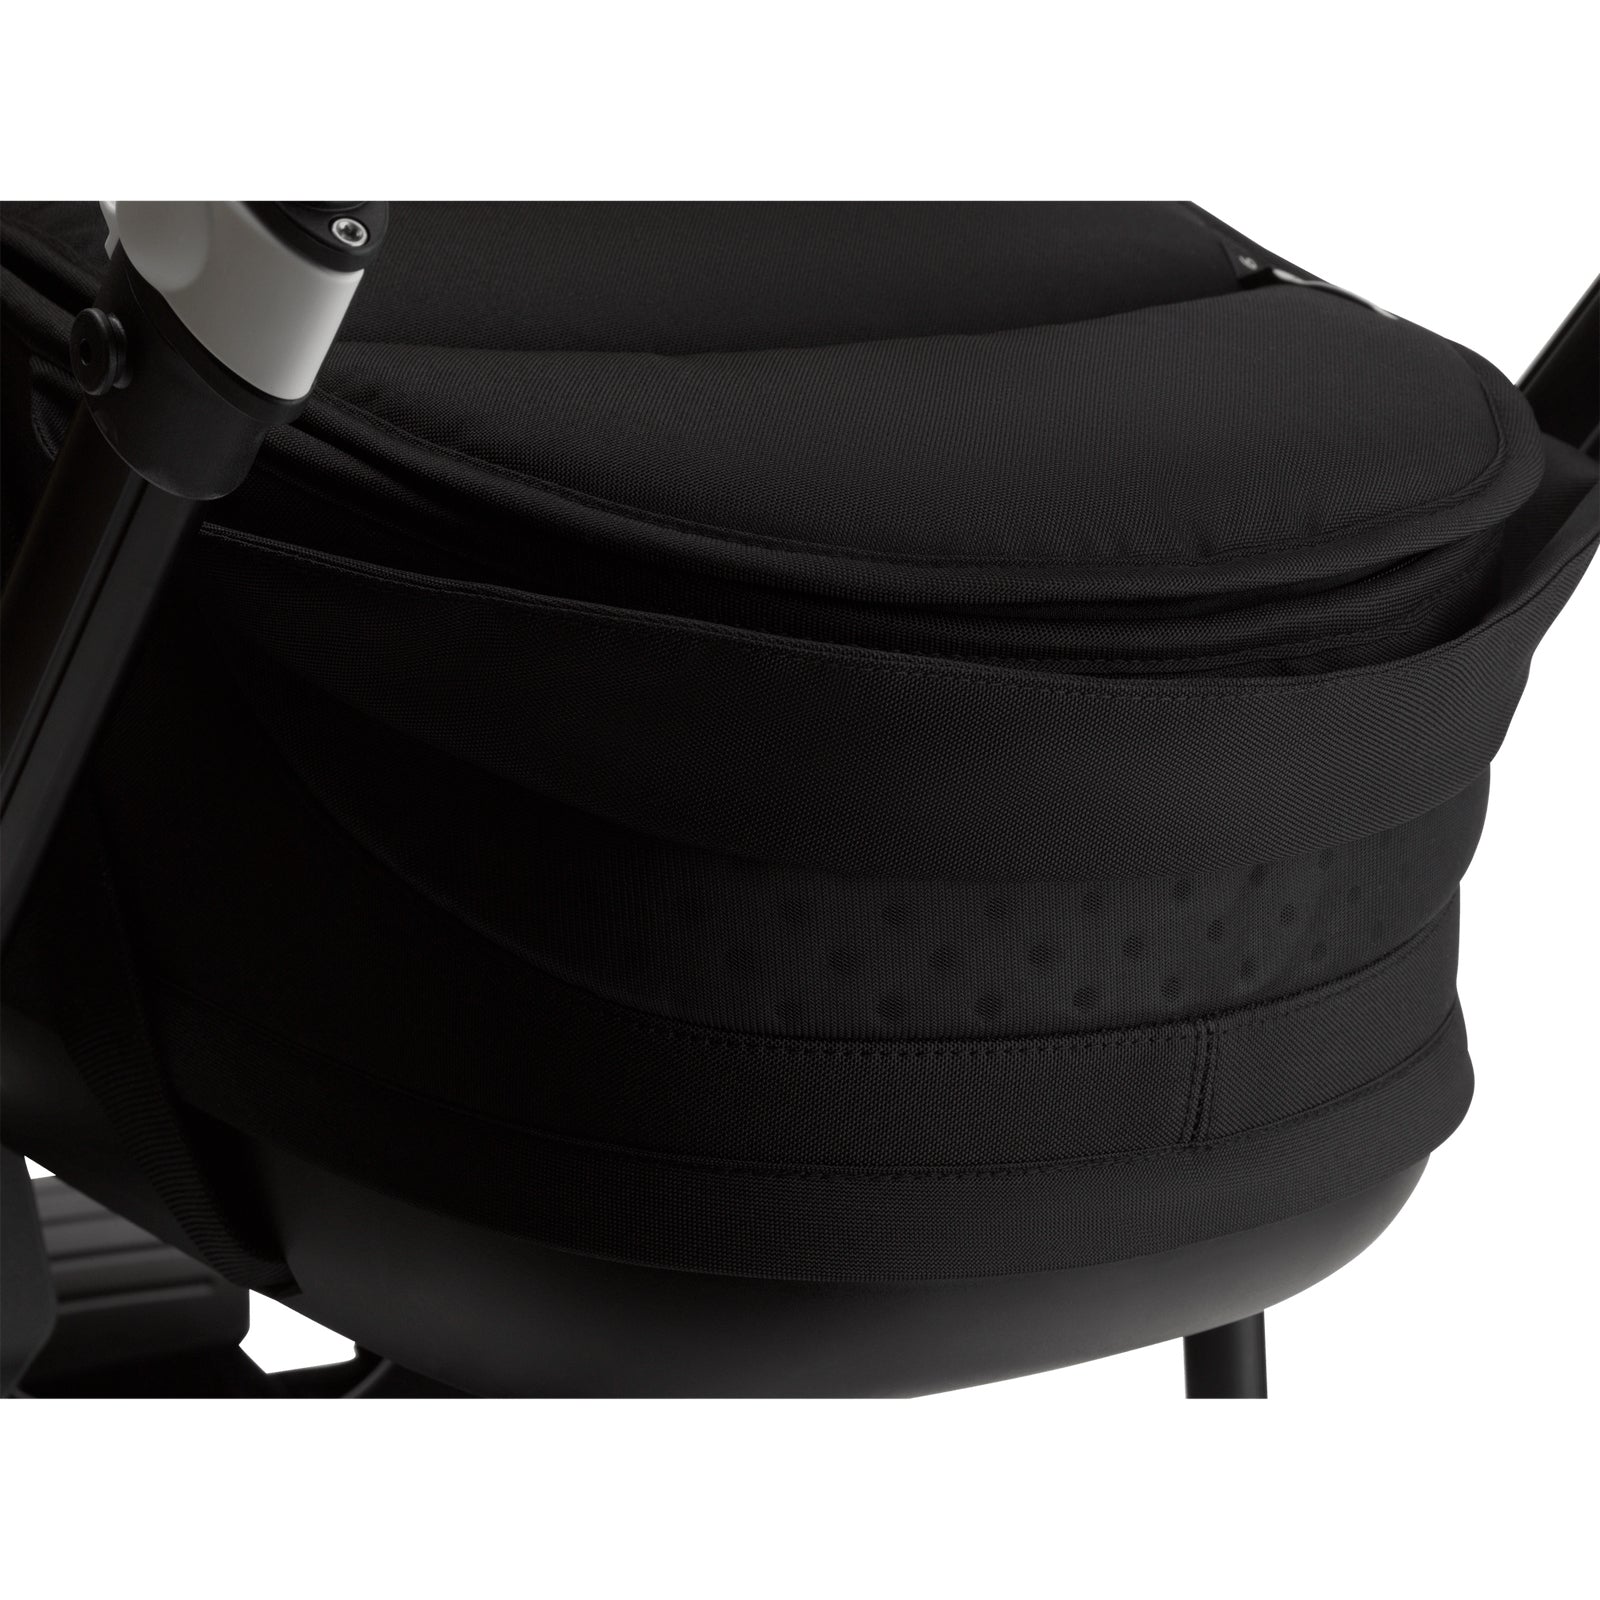 Bugaboo Bee 6 Carrycot and Seat Pushchair - Black